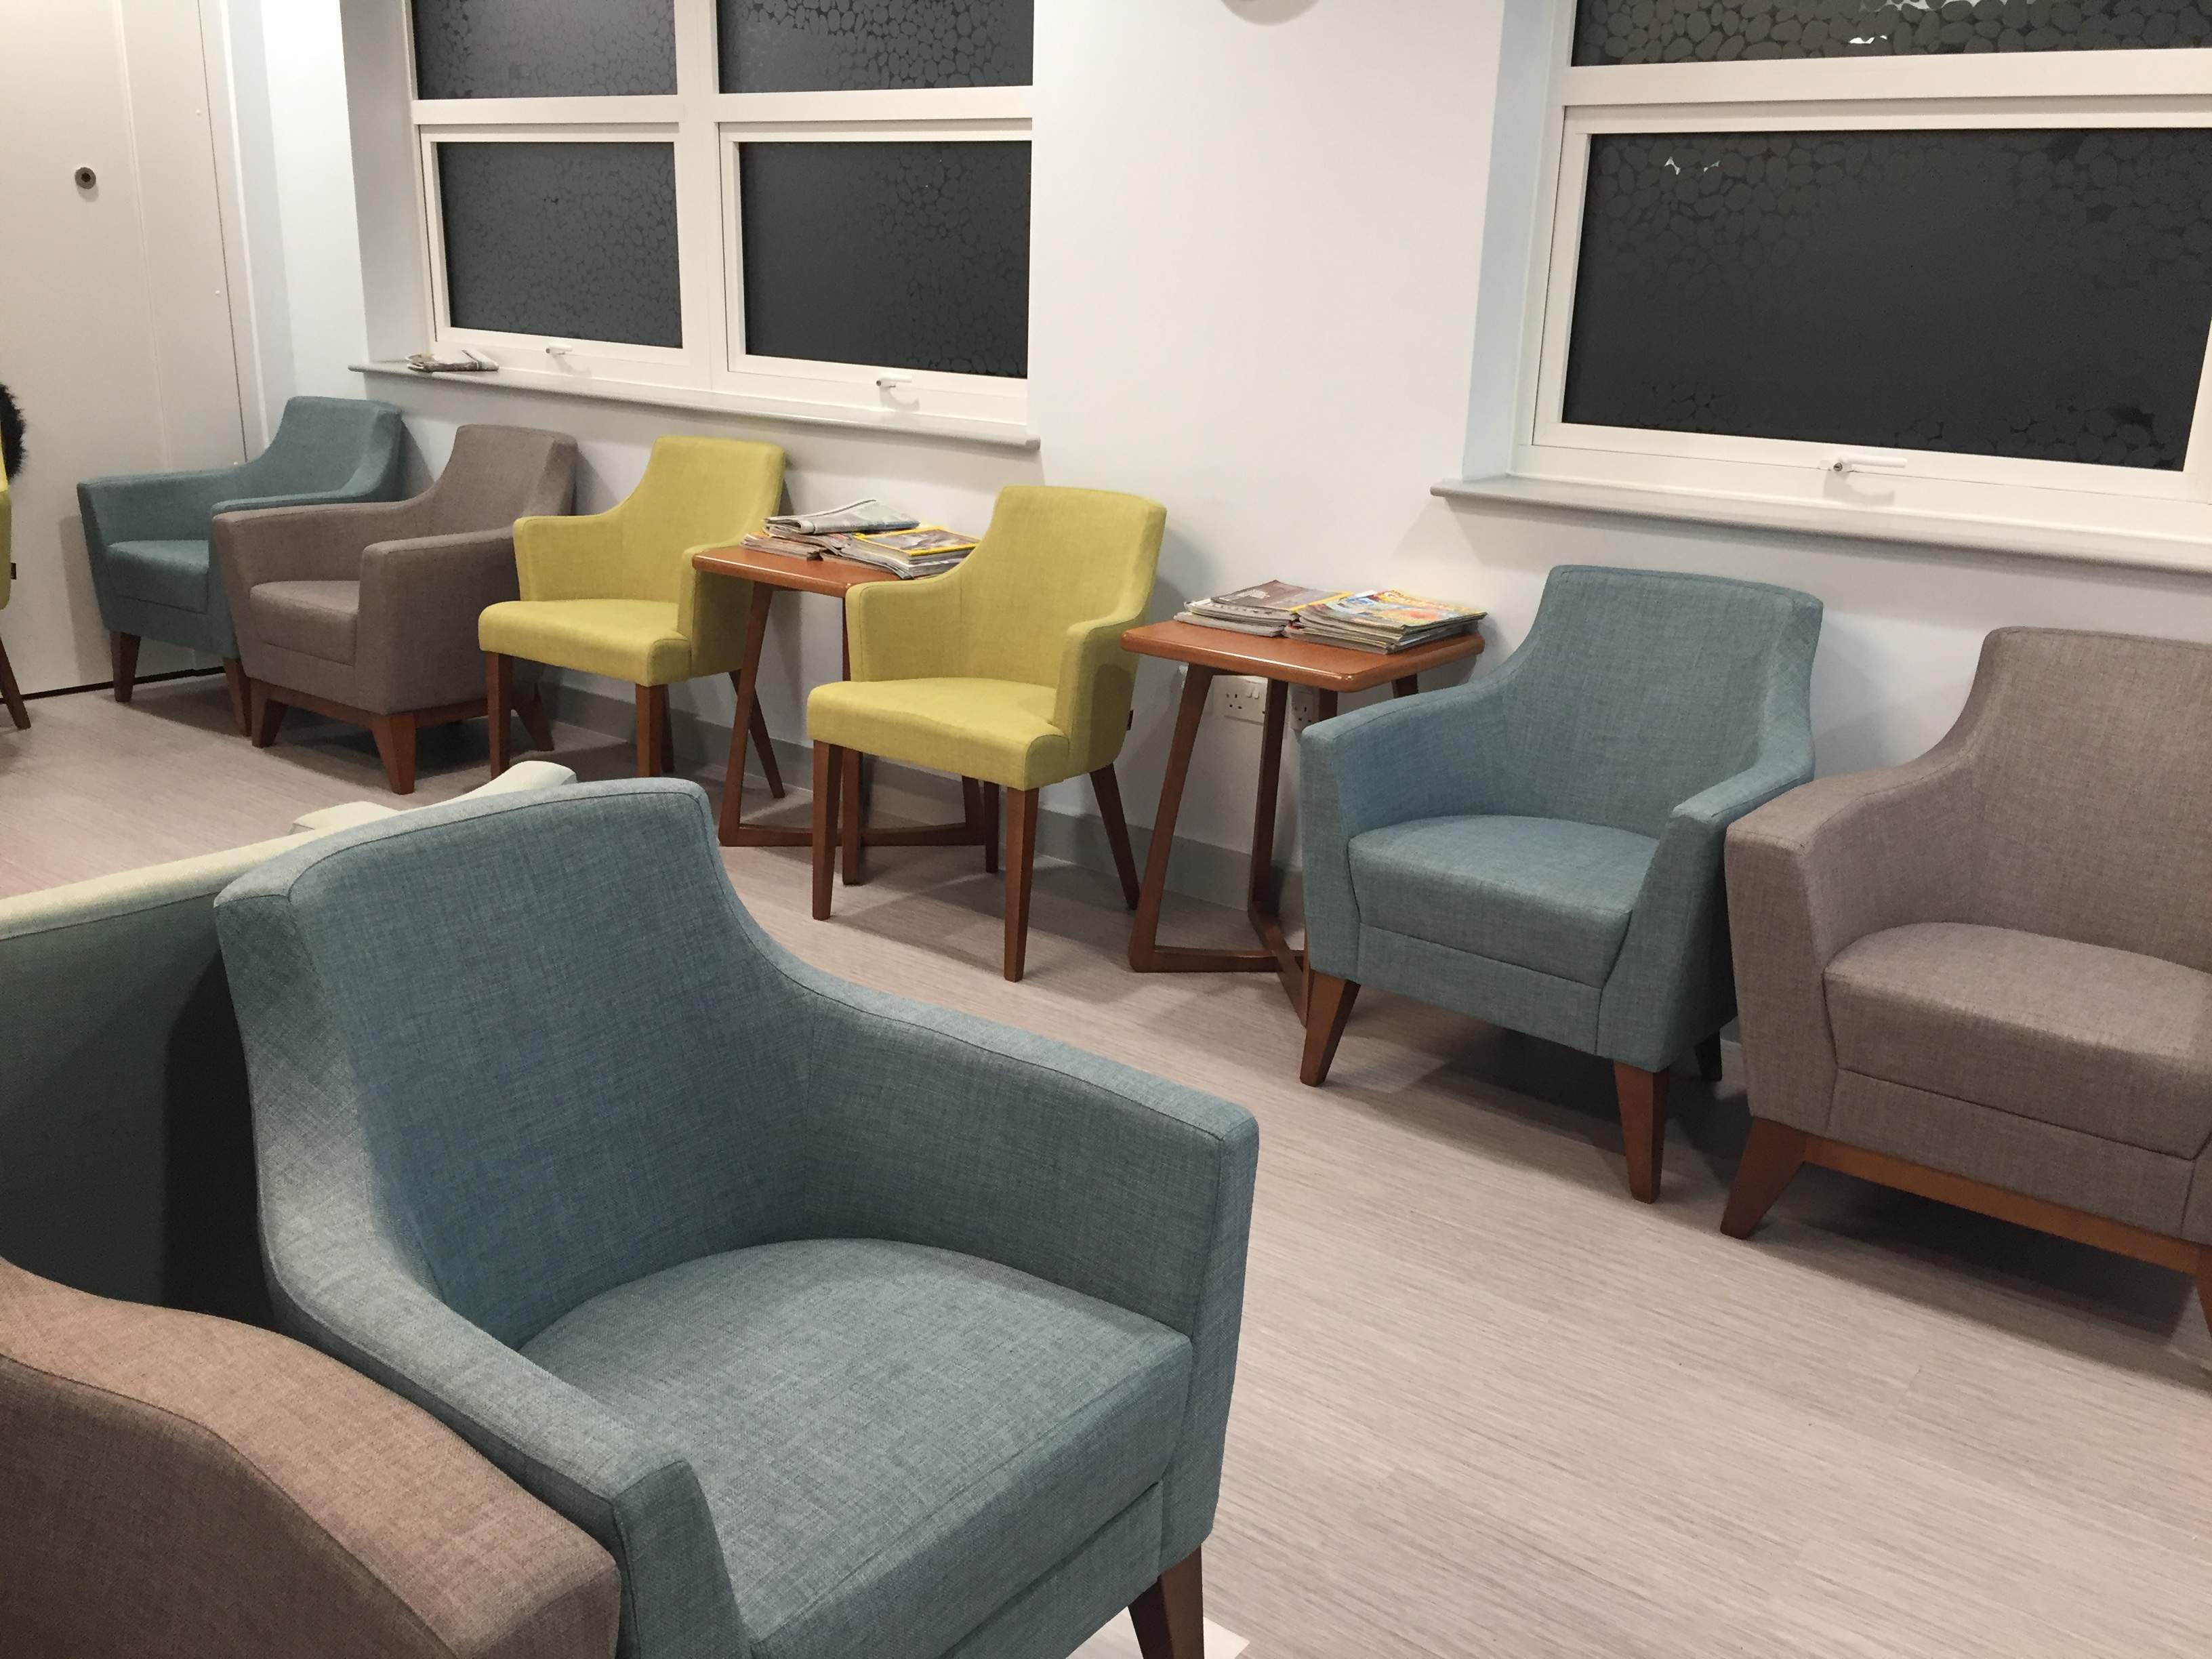 Furniture in radiotherapy reception